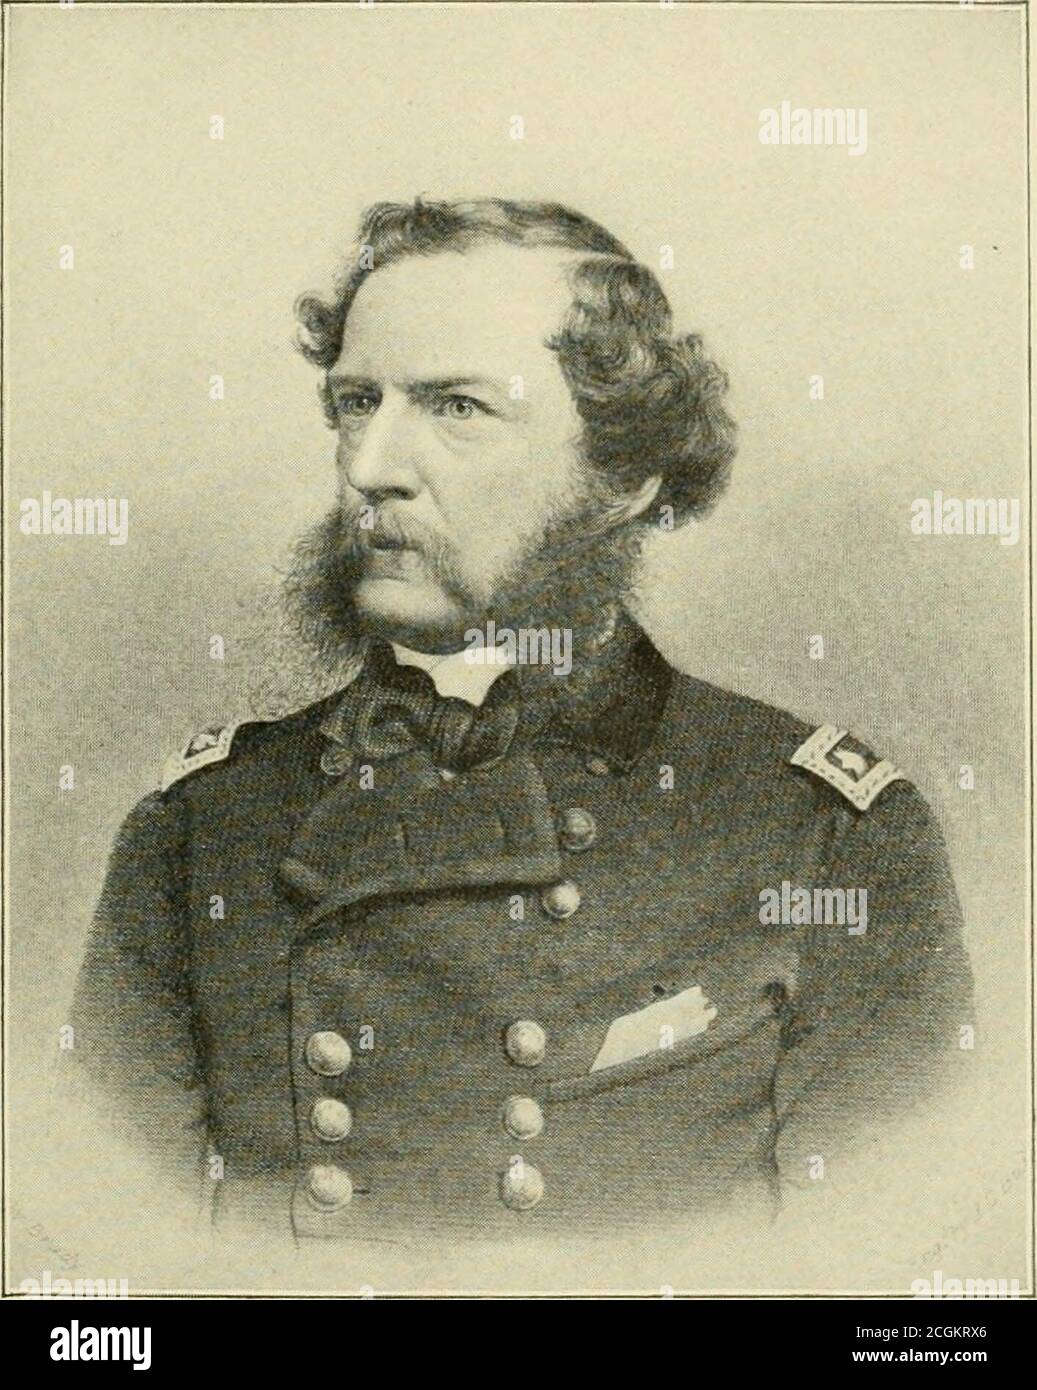 . History of the One hundred and twenty-fifth regiment, Pennsylvania volunteers, 1862-1863 . J5vT. Maj.-Gen. John White Geary. Captain 2nd Pennsylvania Infantry, December 21,1846; Lieutenant-colonel, January 7, 1847; Colonel 23rclPennsylvania Infantry, June 28, 1861 ; Brigadier-GeneralVolunteers, November 25, 1862; Brevet Alajor-GeneralVoliimcers. January 12, 1865. Died February 8, 1872.. 5vT. Maj.-Gen. Samuel Wylie Crawford. Assistant Surgeon, March lo, 1851G neral, Volunteers, April 25, 186;ember 3, 1892 Major, 13th Infantry, May 14, 186; Major-General, March 18,1865; ; BrigadierDied, Nov- Stock Photo